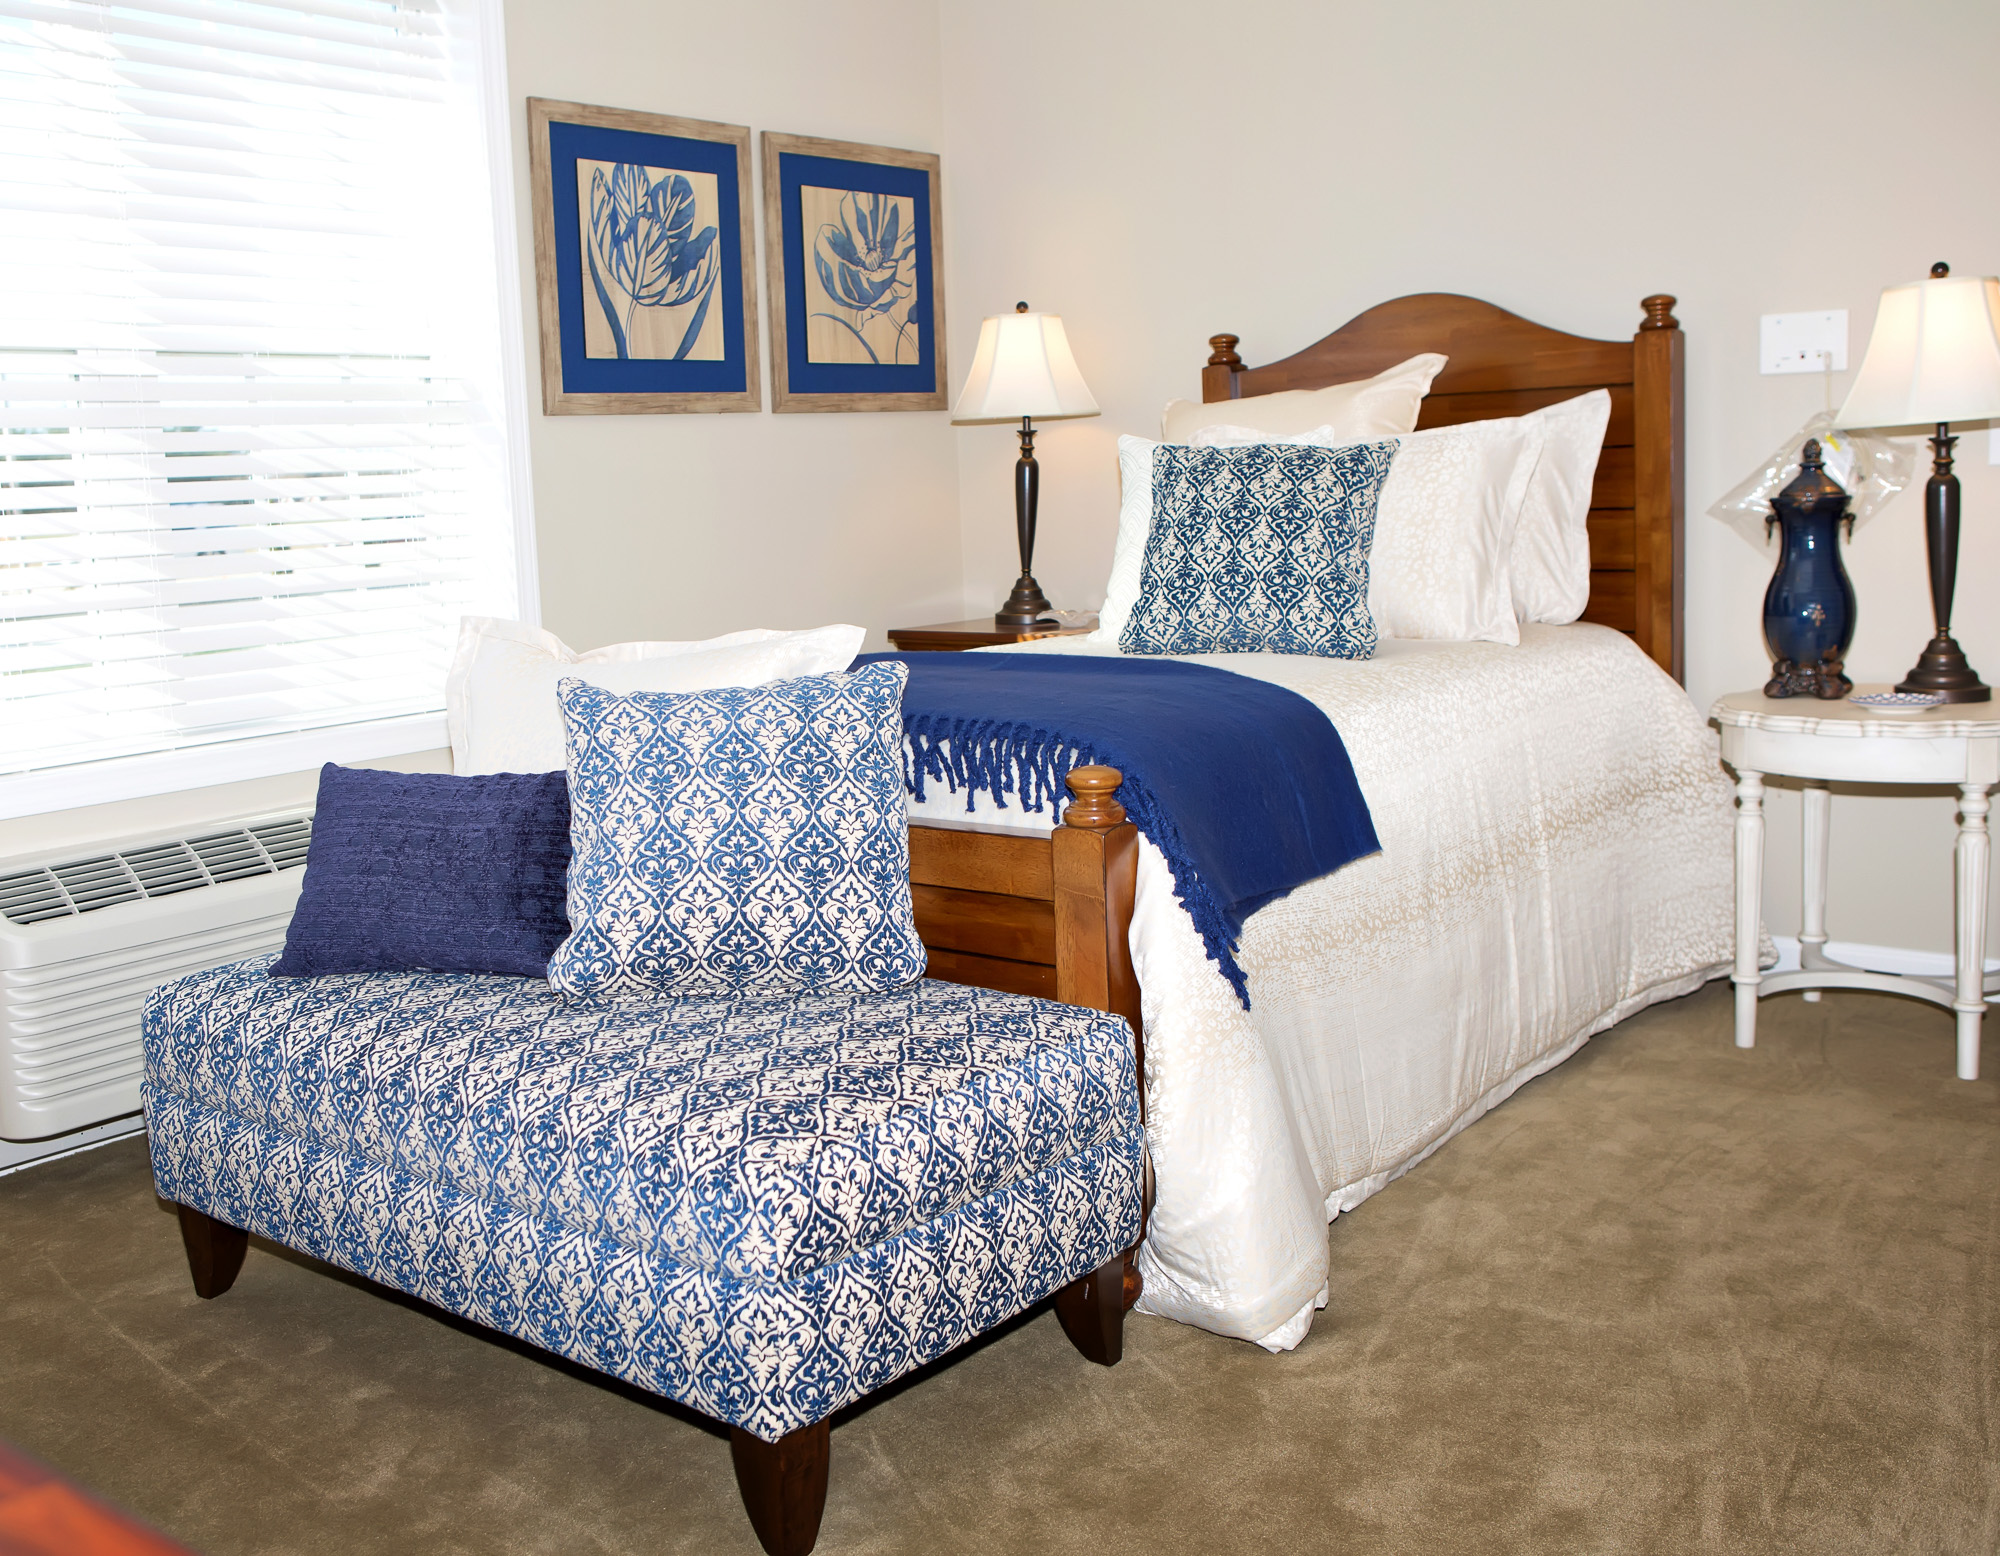 Assisted Living bedroom apartment